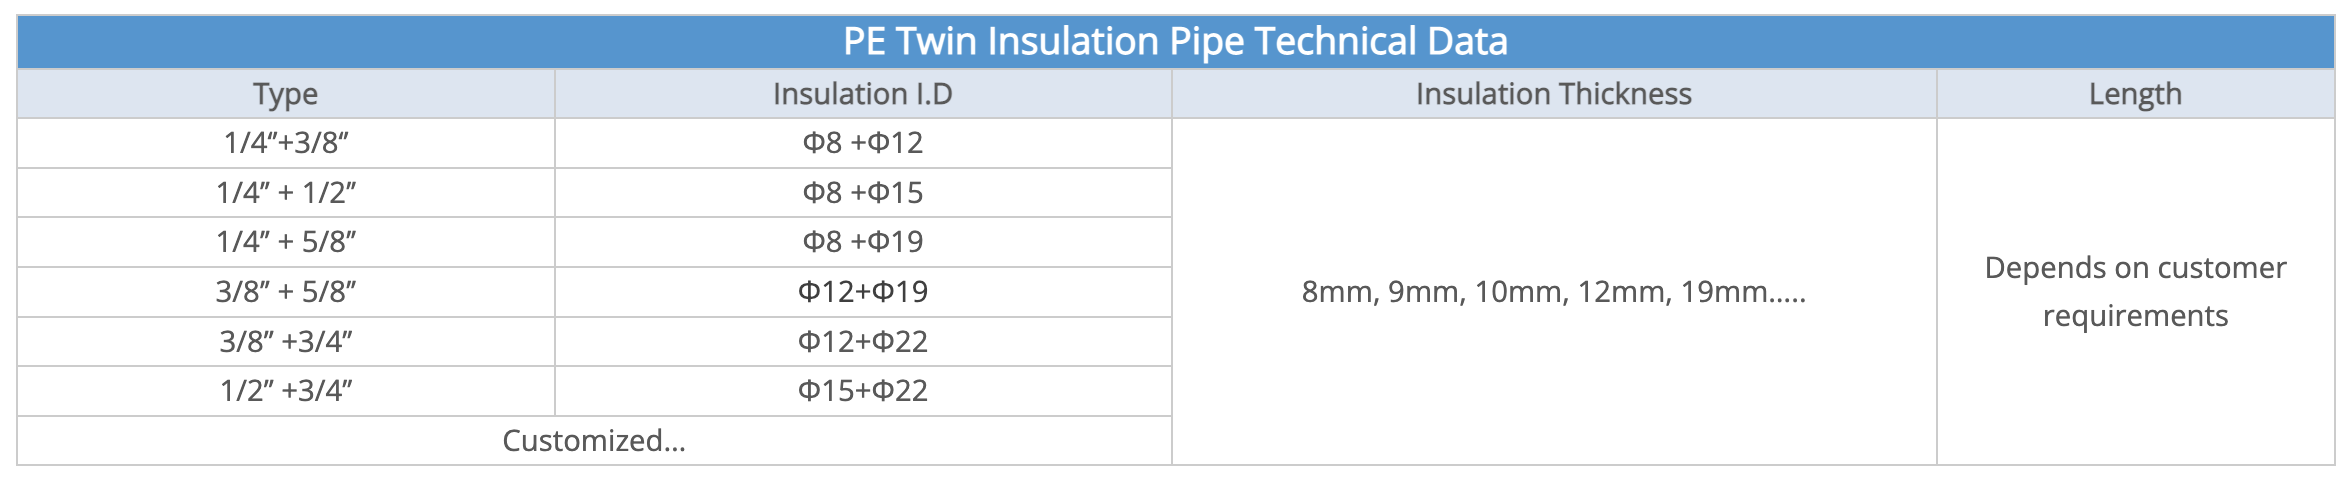 Specification of PE Insulation Pipe (Twin)